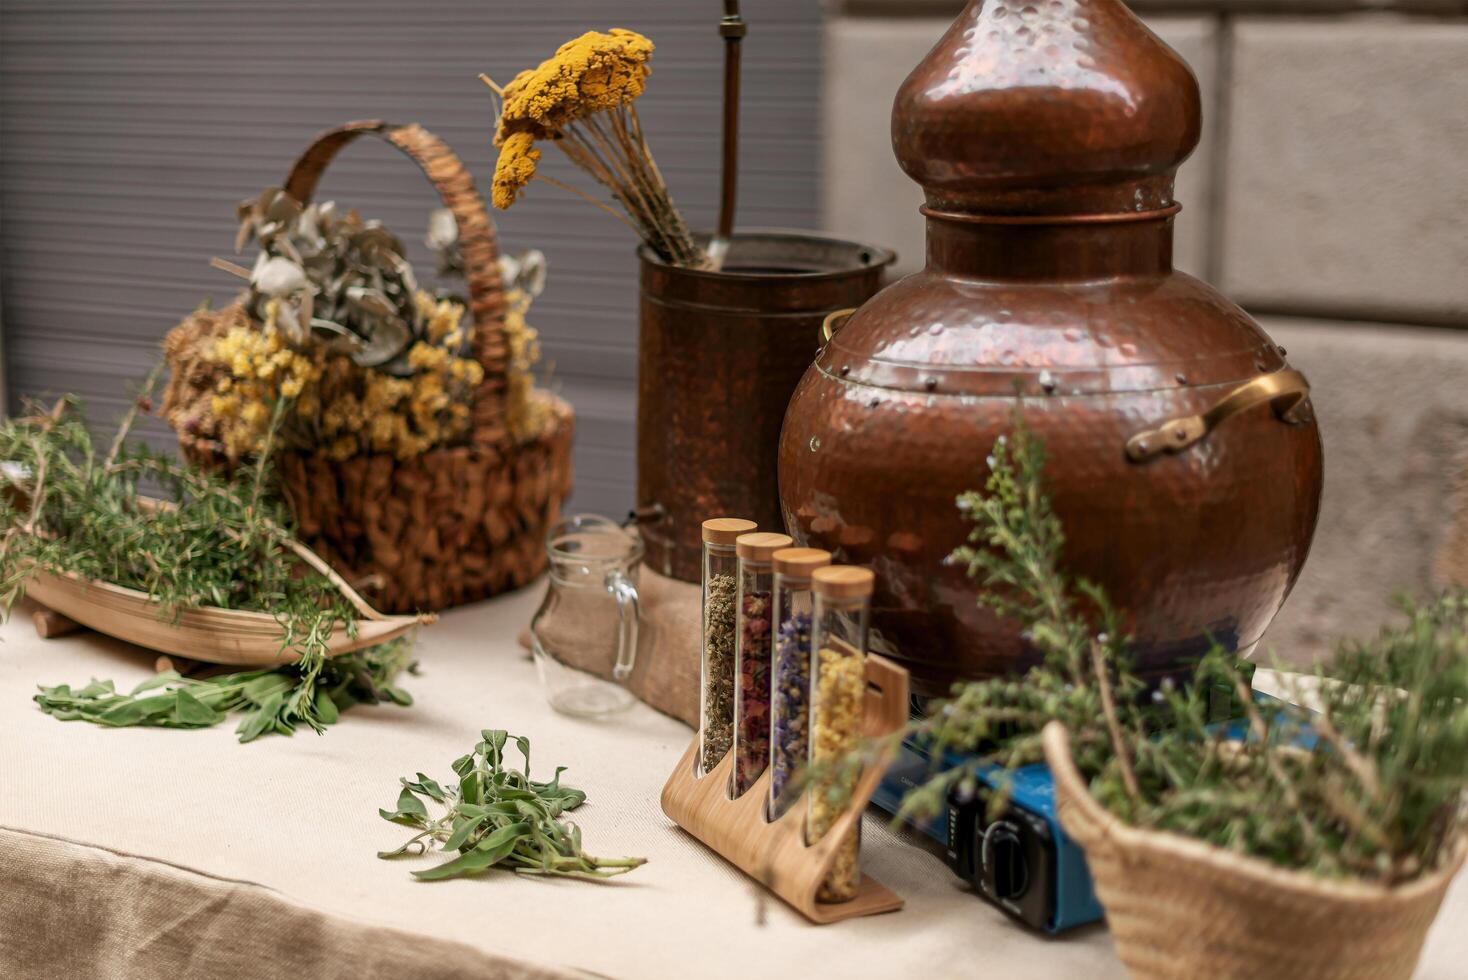 Herbal bench and old copper essential oil distiller photo